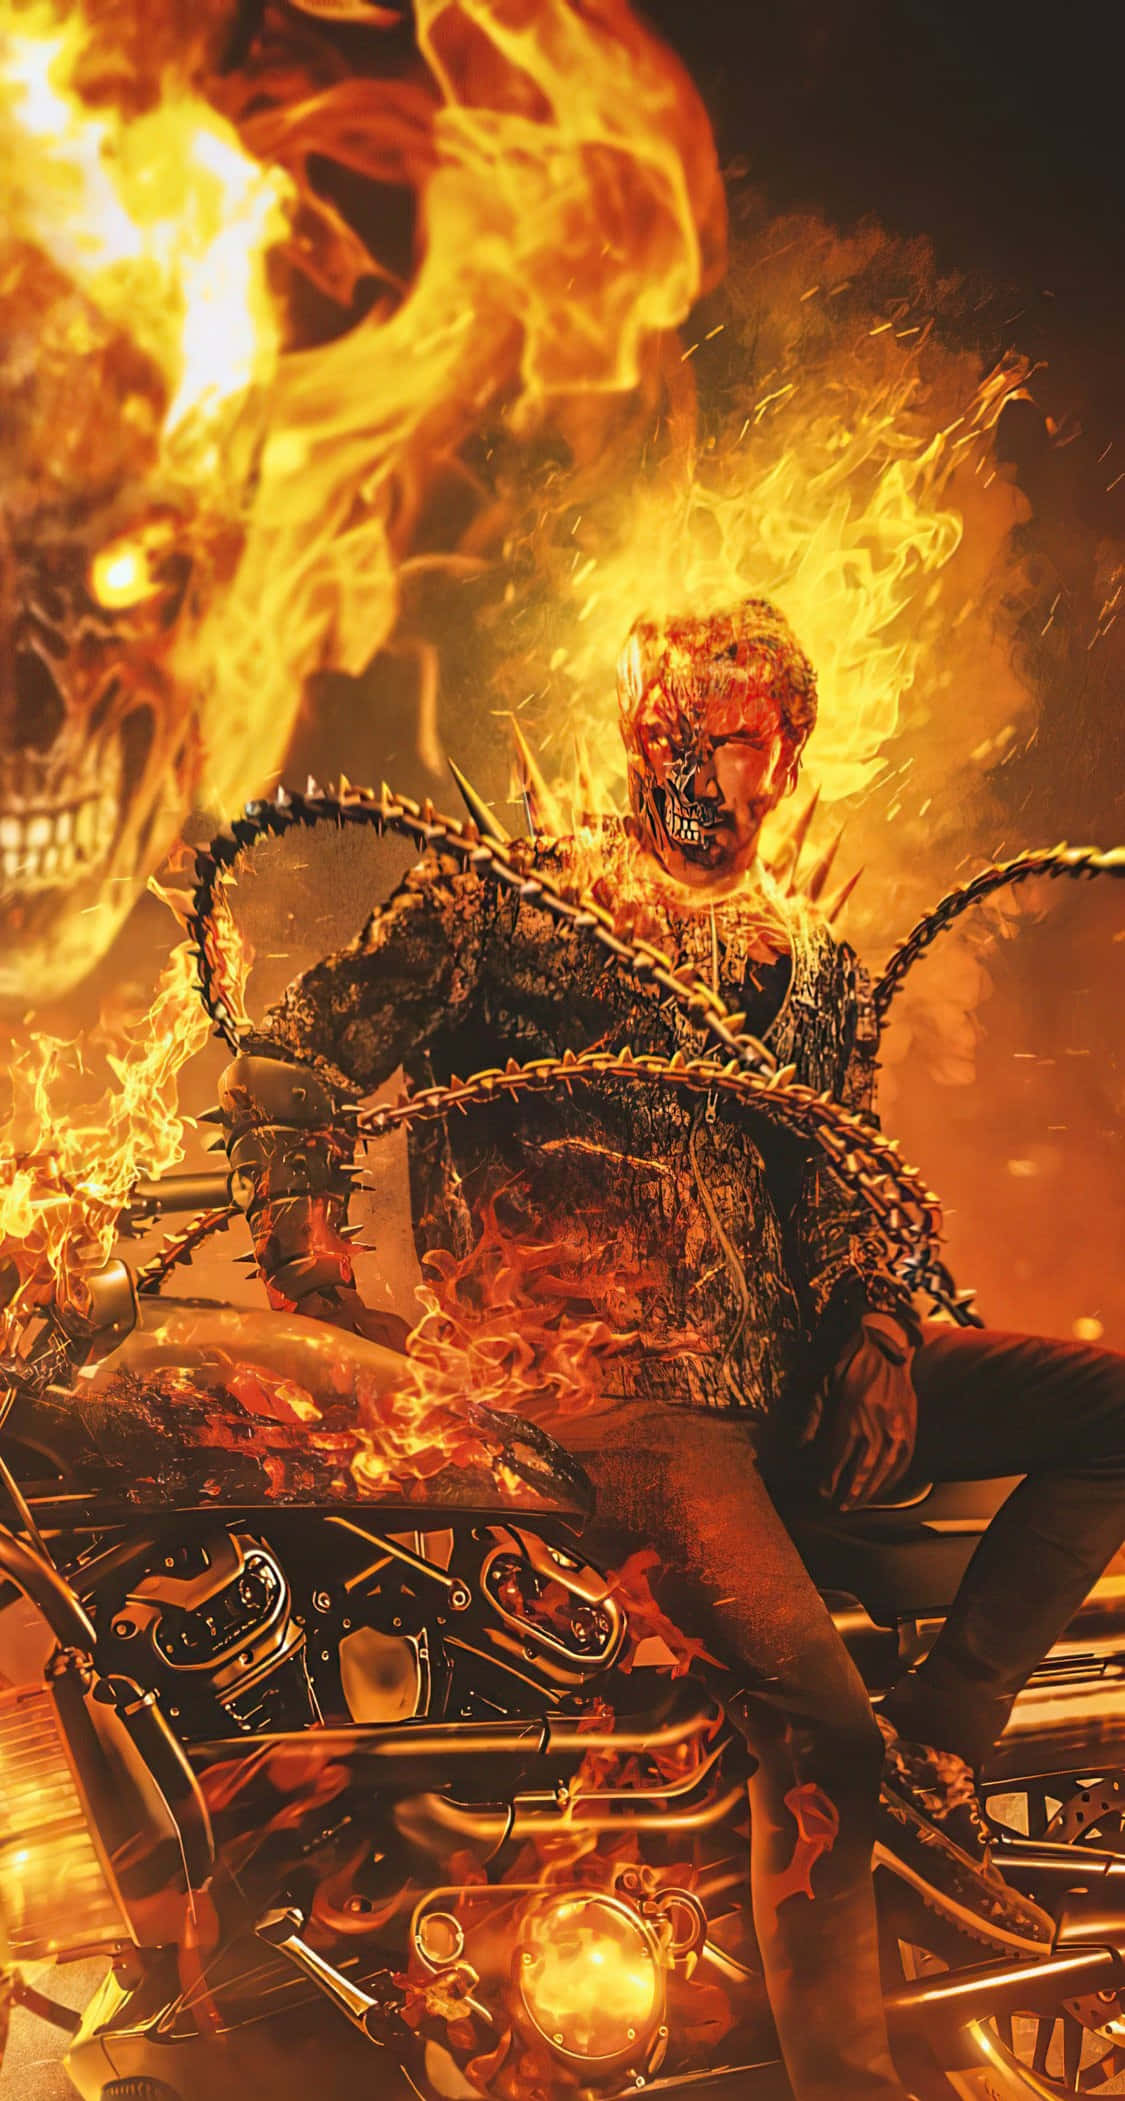 An epic skywalker atop his flaming motorbike - Ghost Rider